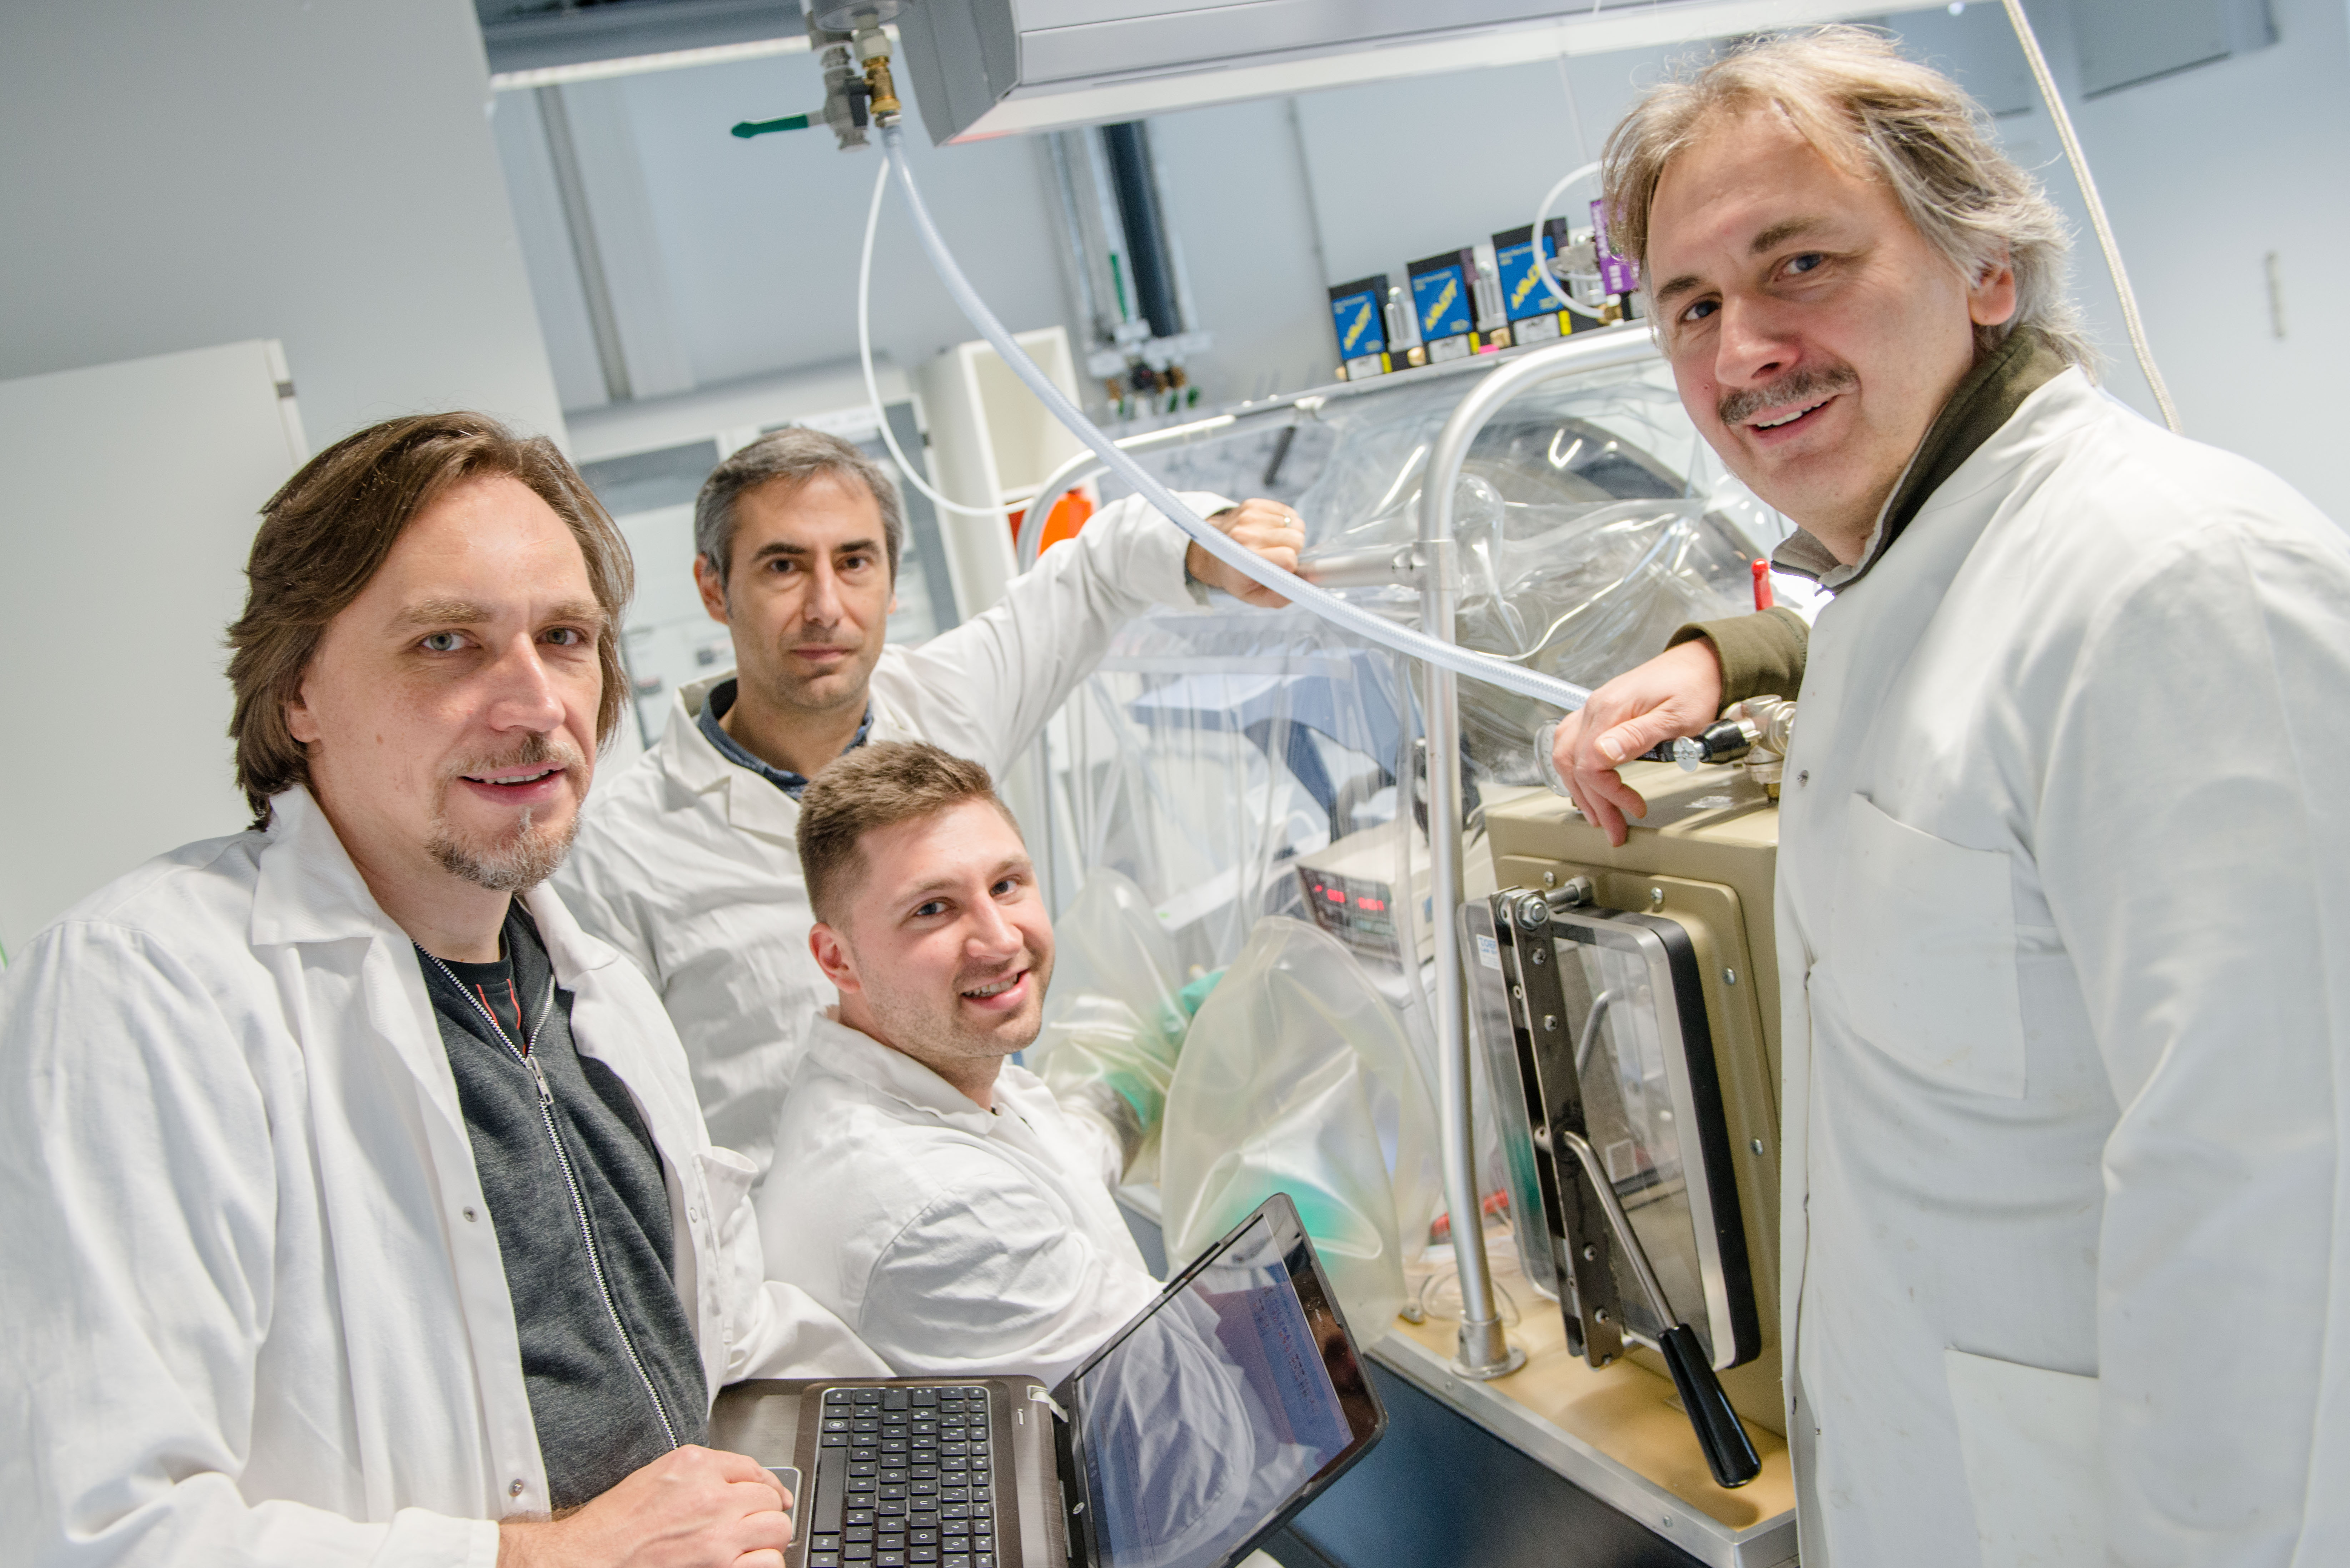  The Bochum scientists Martin Winkler, Oliver Lampret and Thomas Happe (from left to right) together with Olaf Rüdiger (in the background) from the Max Planck Institute © RUB, Marquard